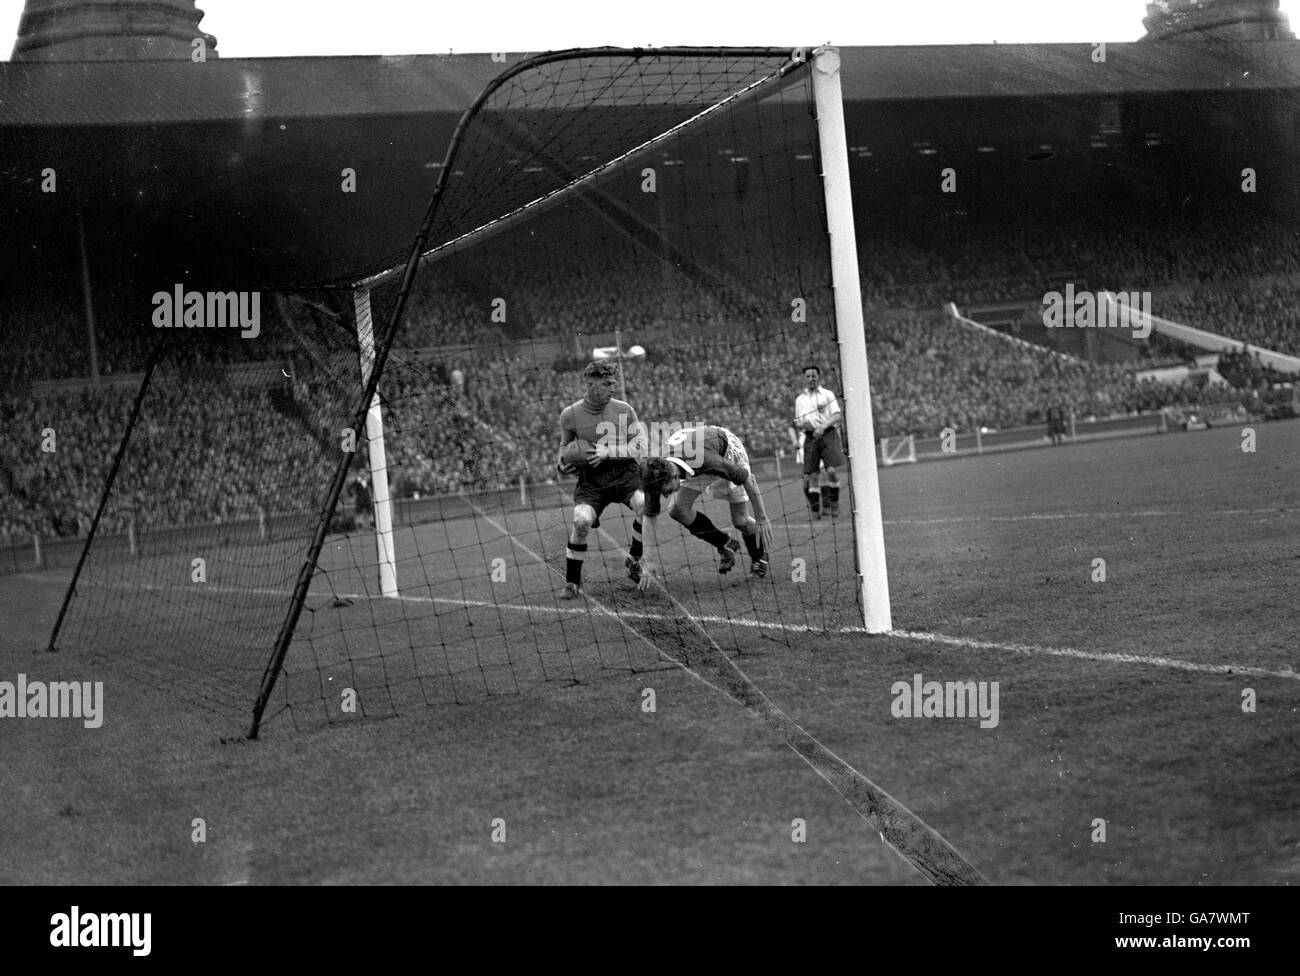 Joe Payne (Chelsea) tries to charge Sam Bartram into the net. Bartram, usually Charlton goalkeeper was a guest player for Millwall. Chelsea won the wartime match 2-0. Stock Photo